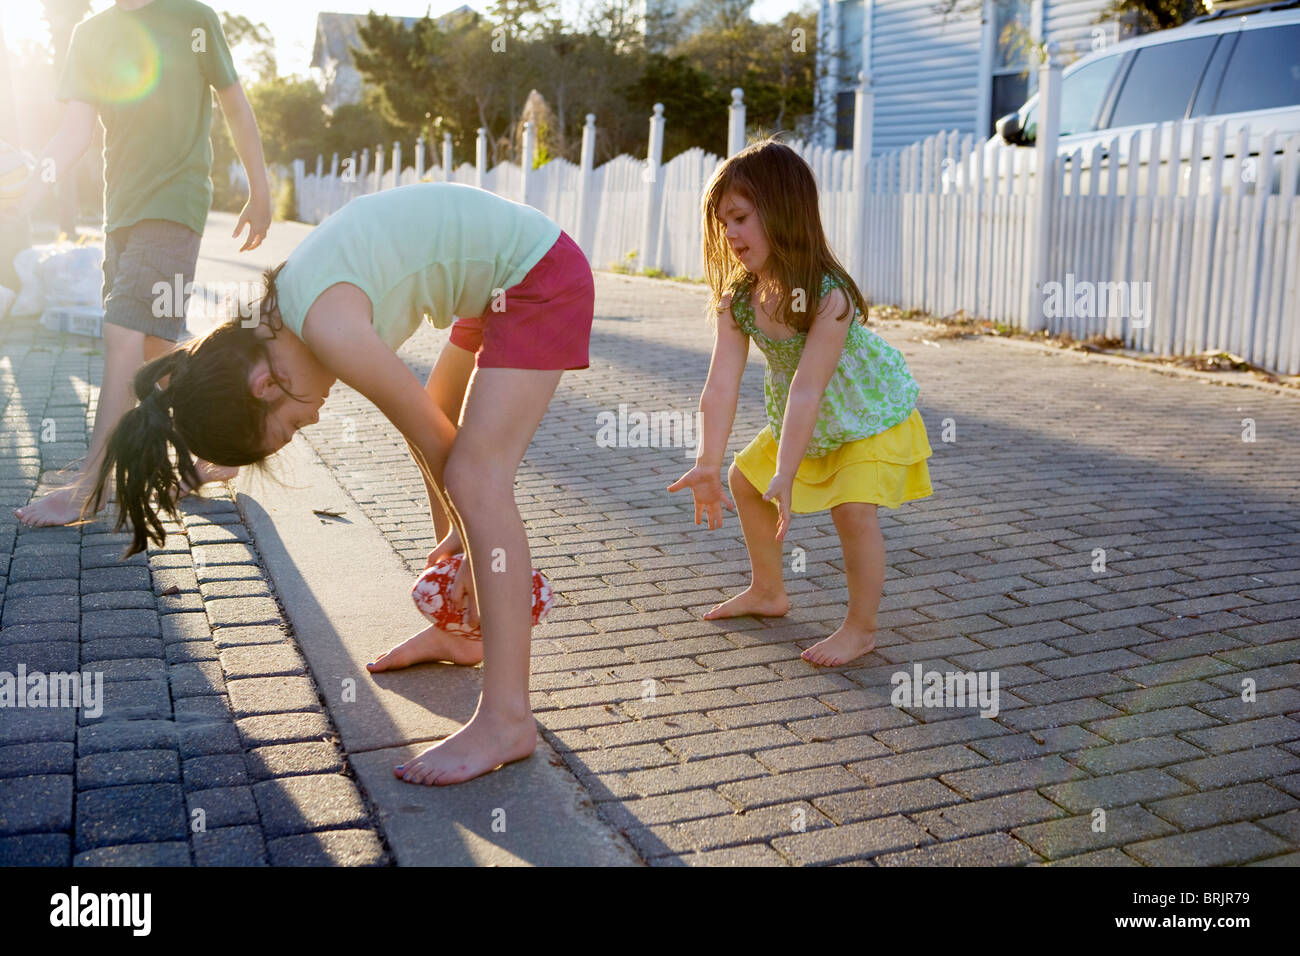 Two little girls are playing football in an alleyway with the sun in background. Stock Photo